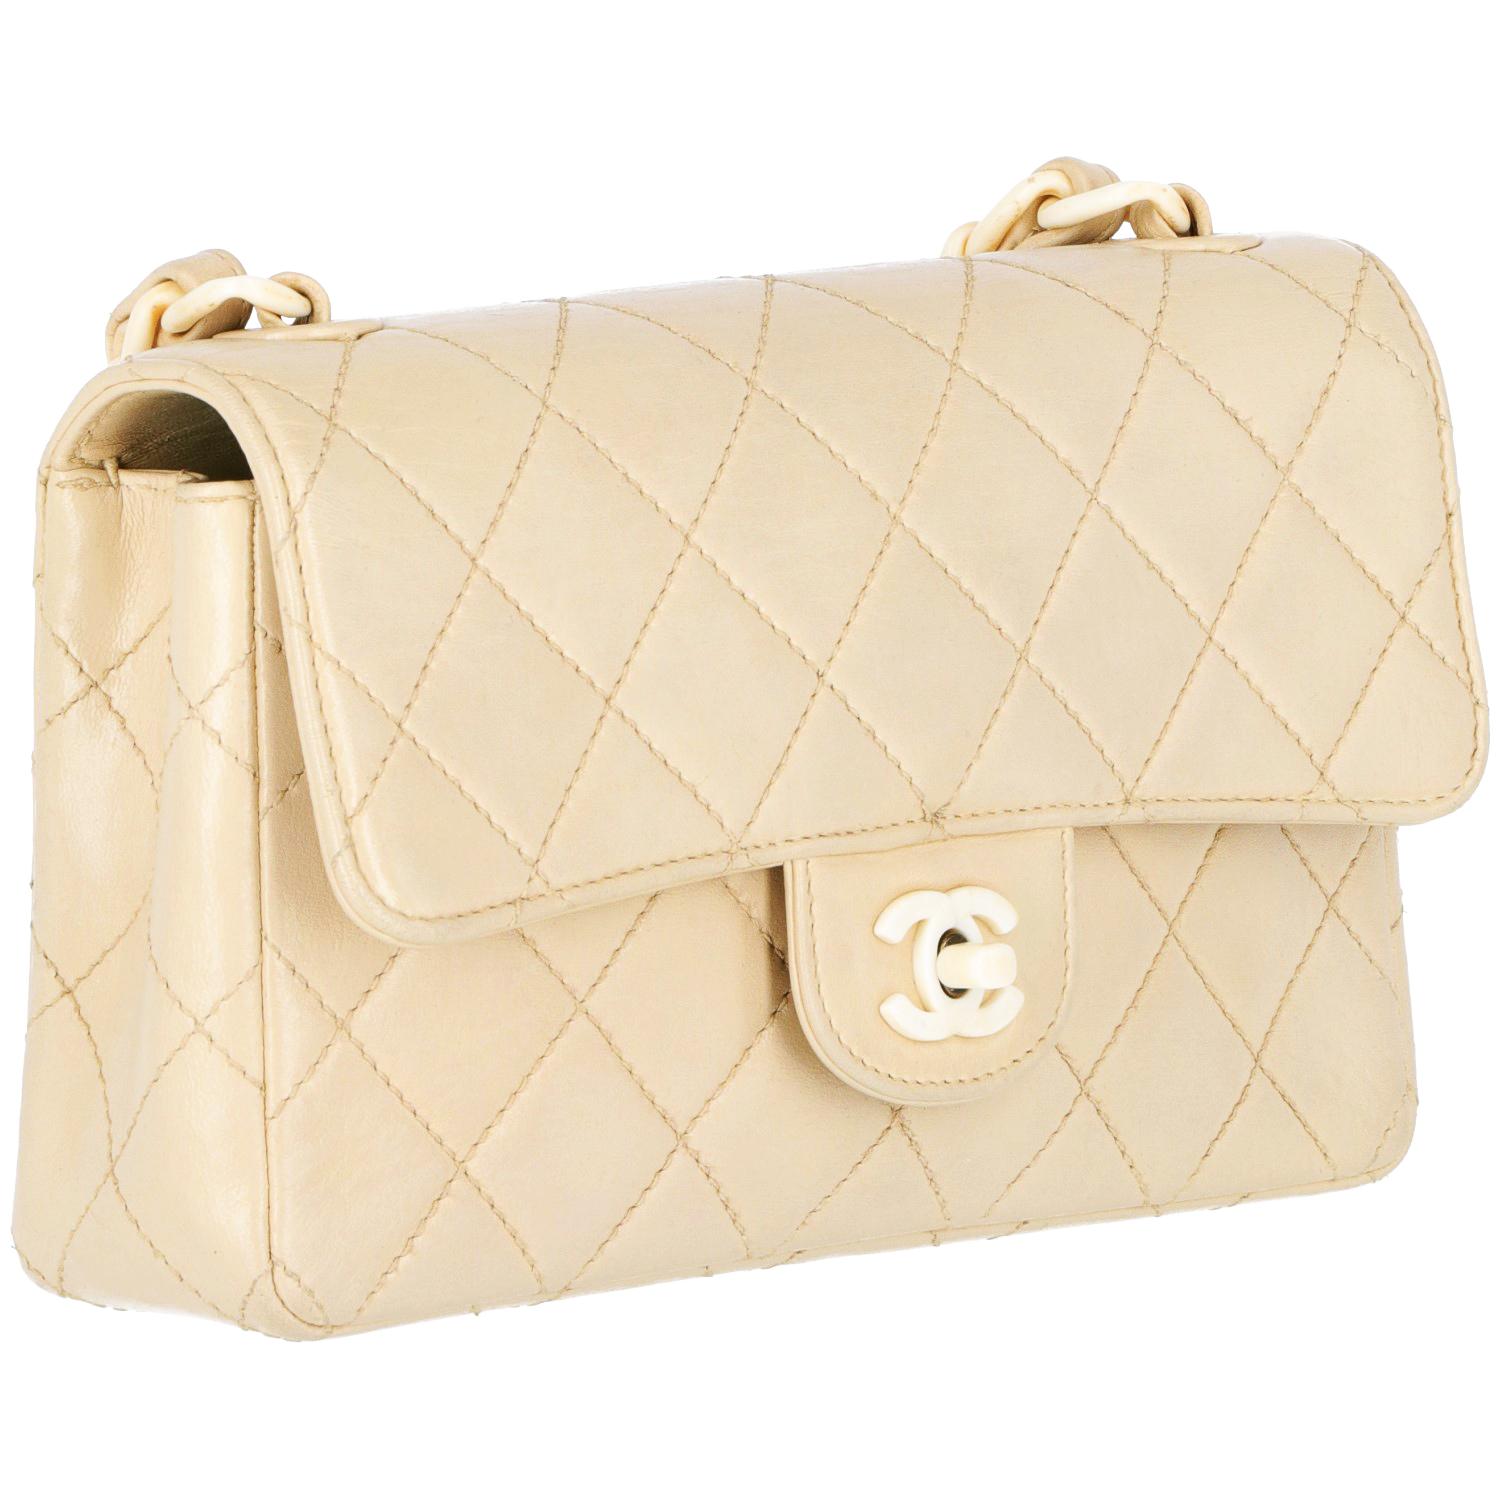 The Chanel matelassé leather bag is from 1997-1999 Chanel collection. With ivory chain and braided leather shoulder strap, front logo ivory pvc plaque and clasp fastening. The authenticity card is included. The bag is vintage: it shows different